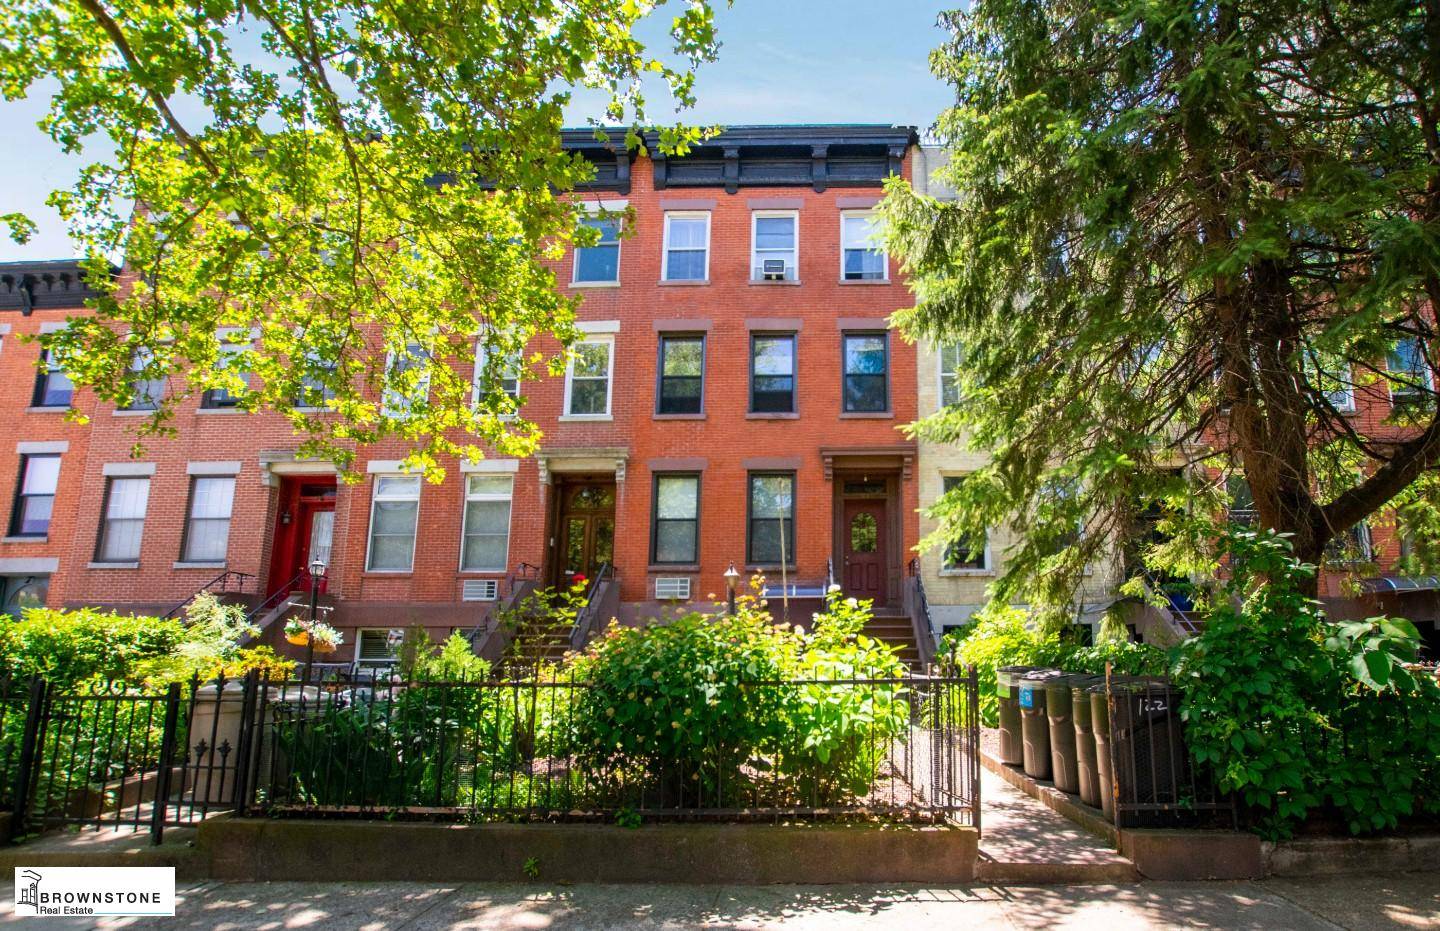 Brownstone Real Estate is excited to announce the exclusive Sale of 122 3rd Place, located in the highly sought after Carroll Gardens neighborhood.